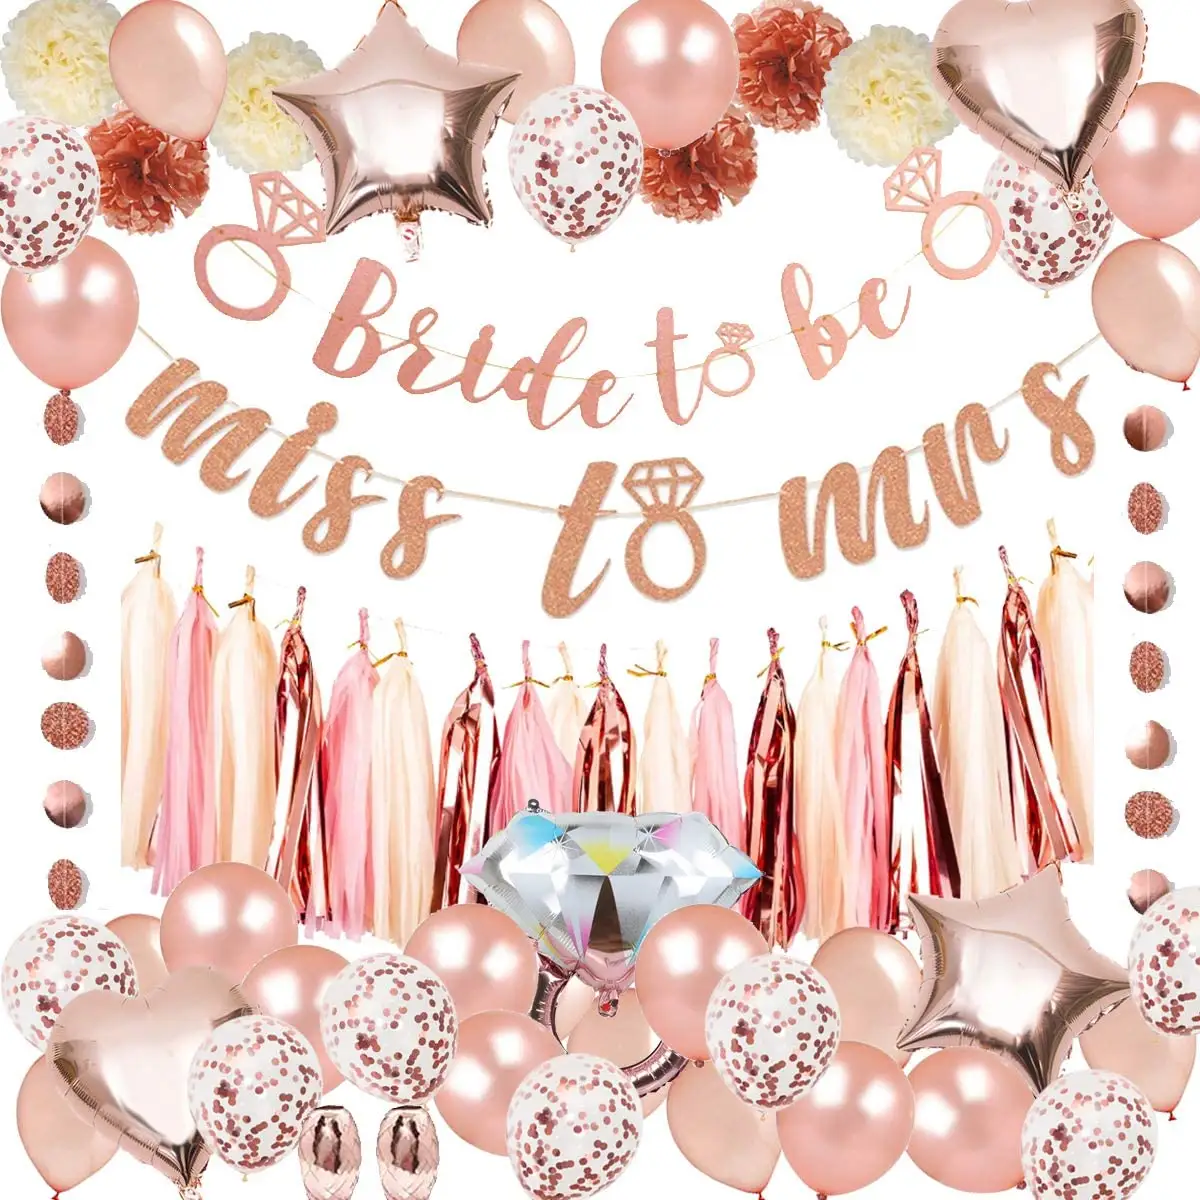 Amazon Hot Sell Rose Gold Bride To Be Miss To Mrs Banner Balloons Decorations Bridal Shower Bachelor Party Supplies